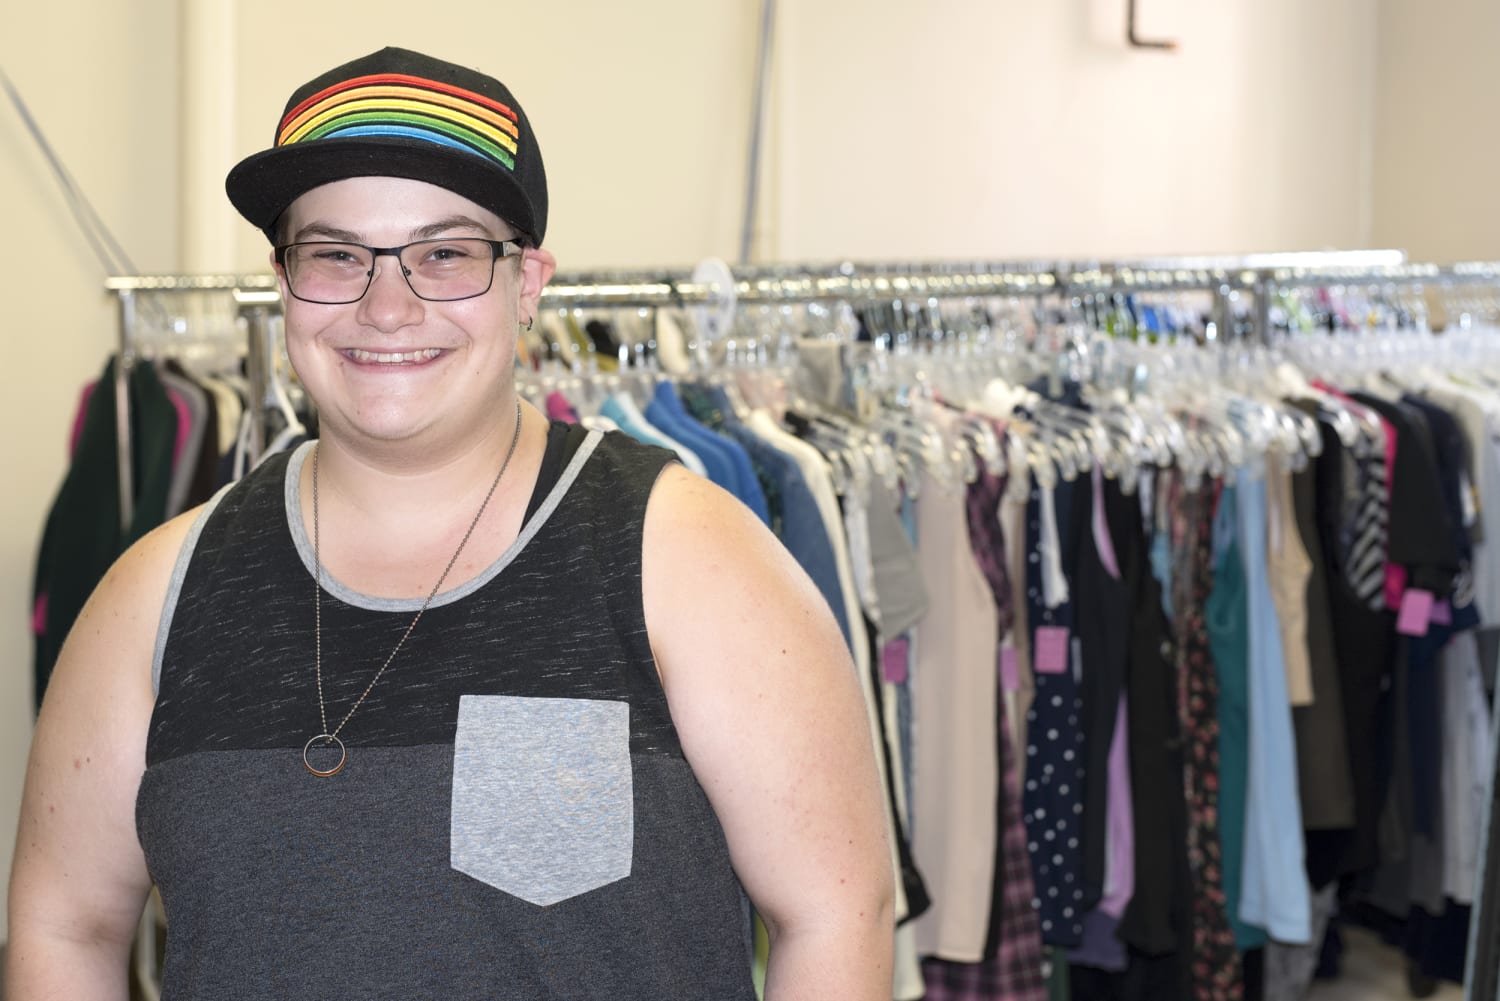 Across U.S., several colleges open 'clothing closets' for trans